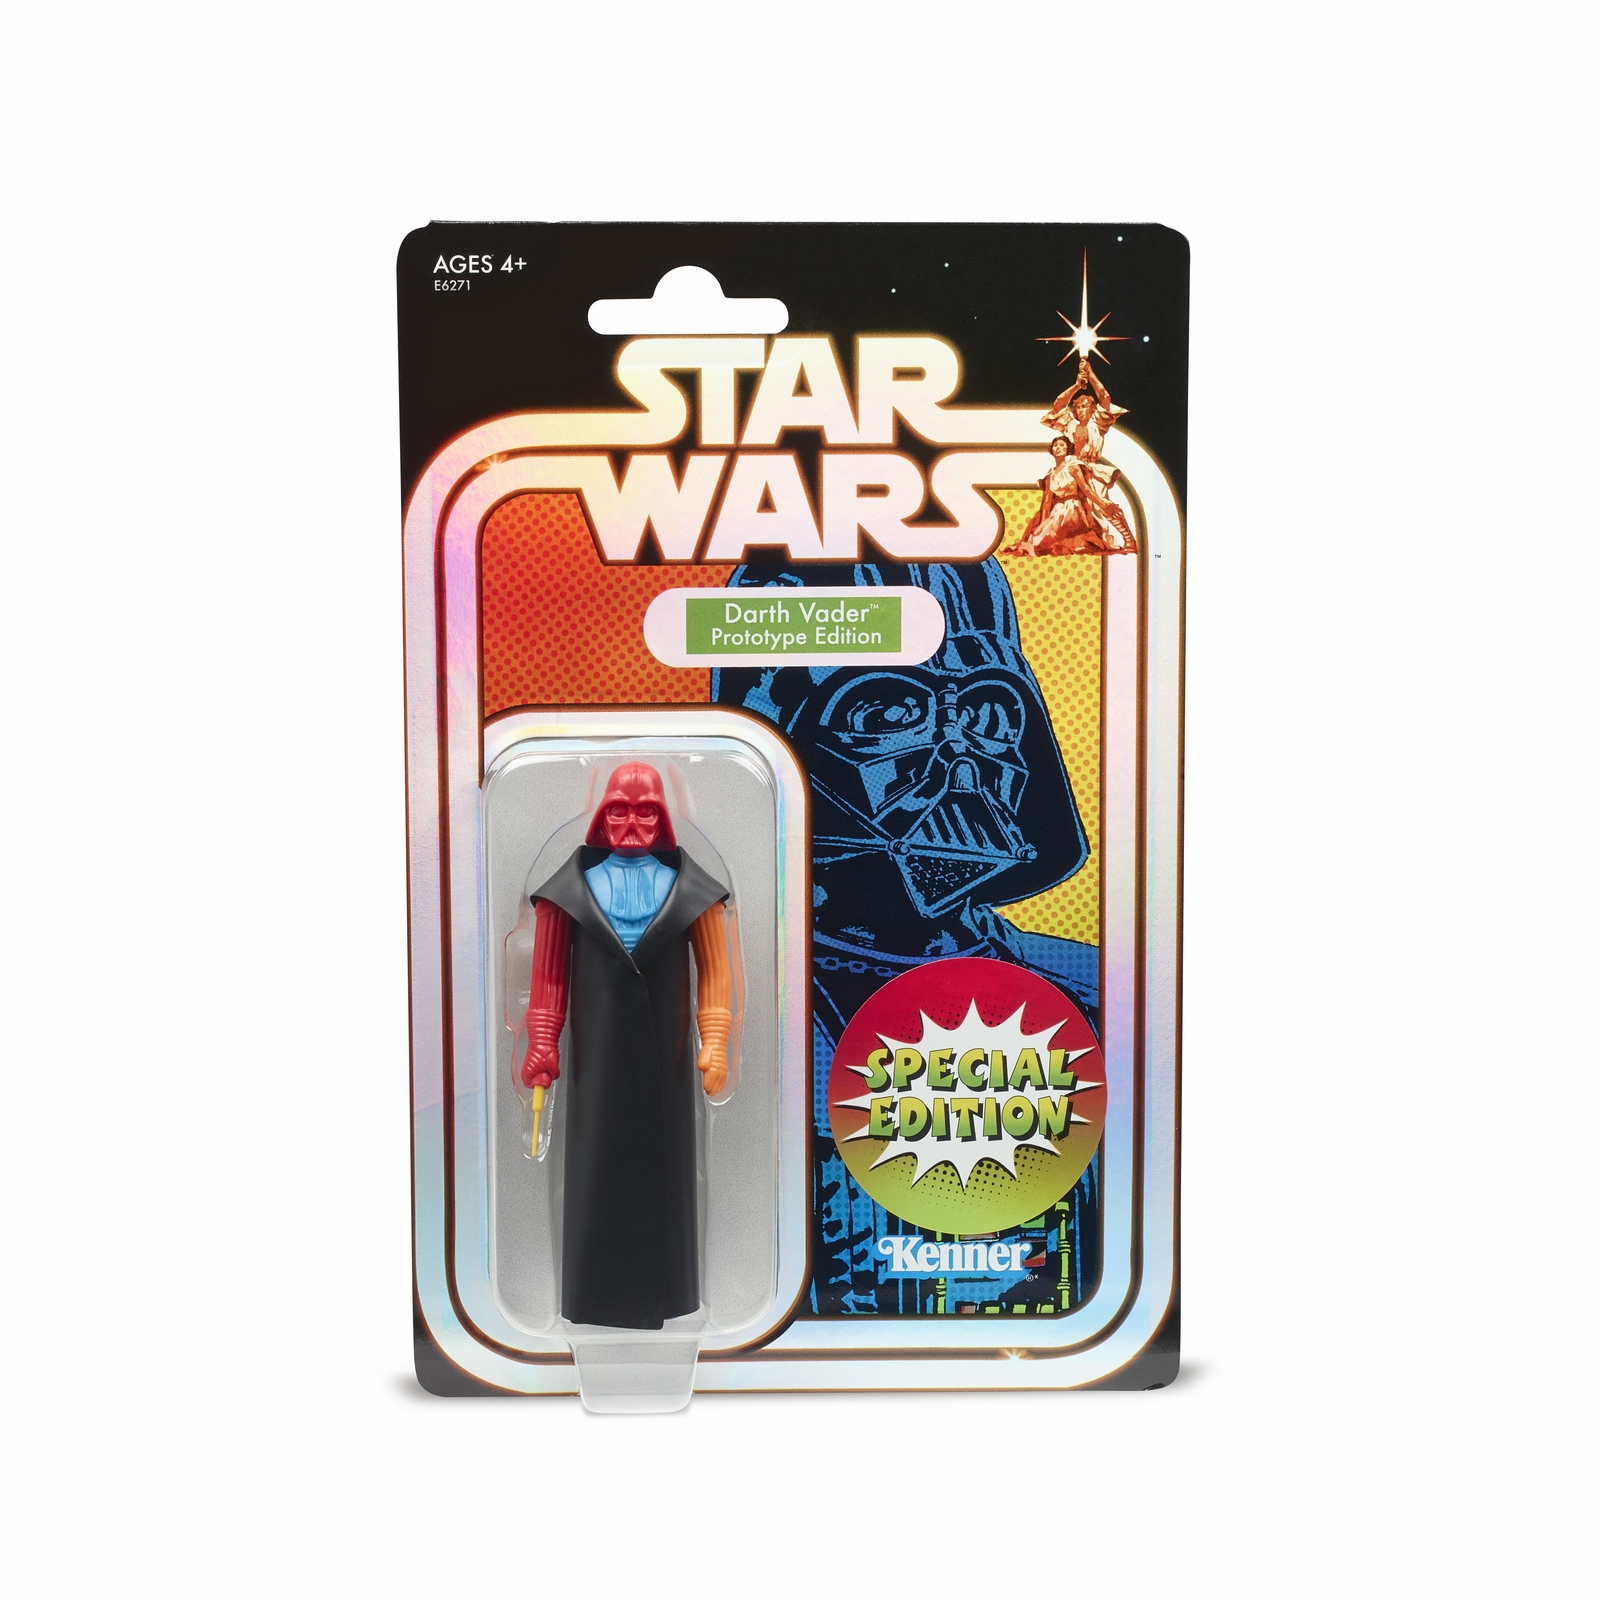 STAR WARS SPECIAL EDITION RETRO PROTOTYPE 3.75-INCH DARTH VADER Figure  - in pack (1).jpg